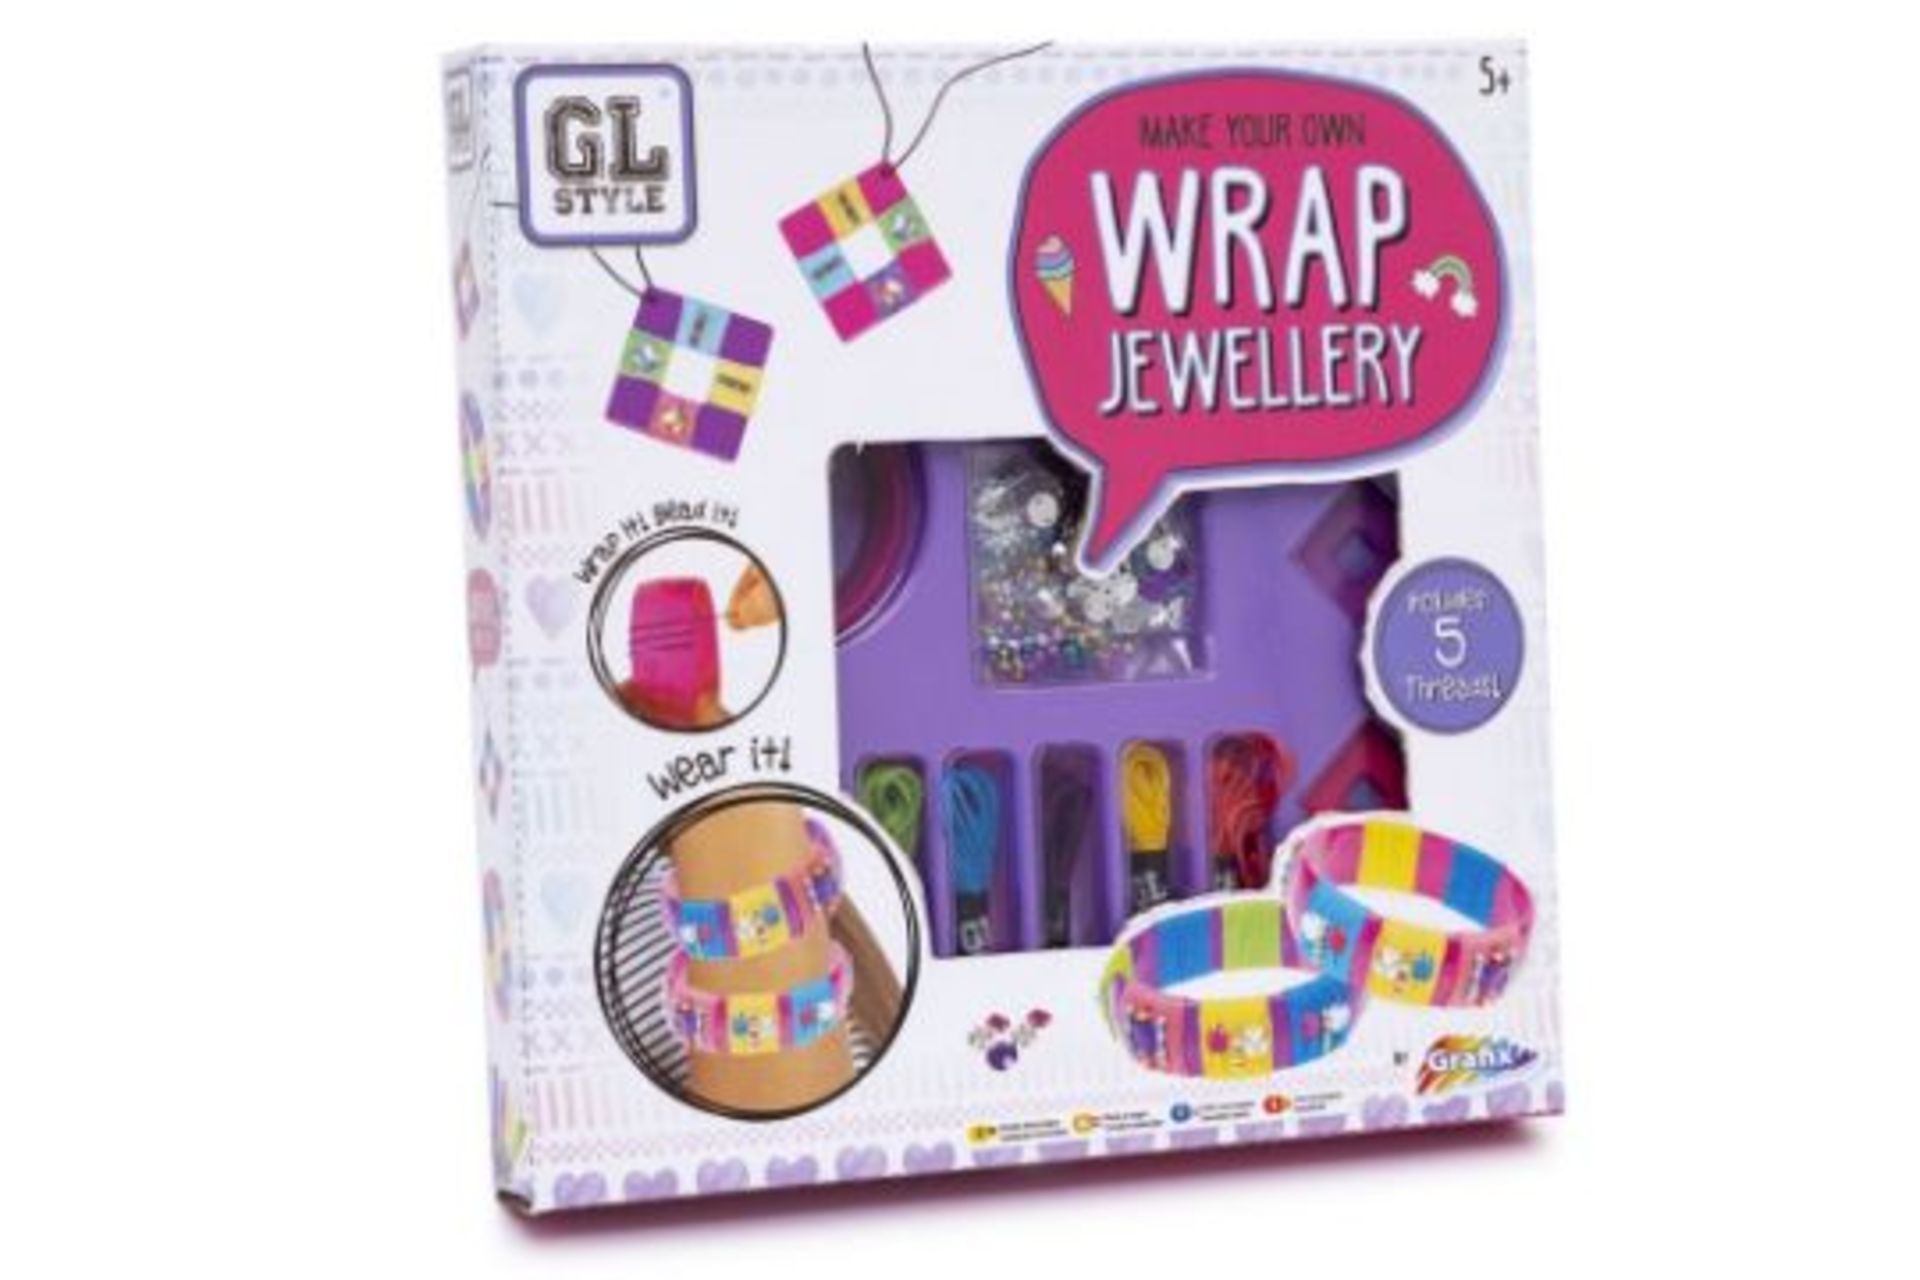 GL STYLE MAKE YOUR OWN WRAP JEWELLERY